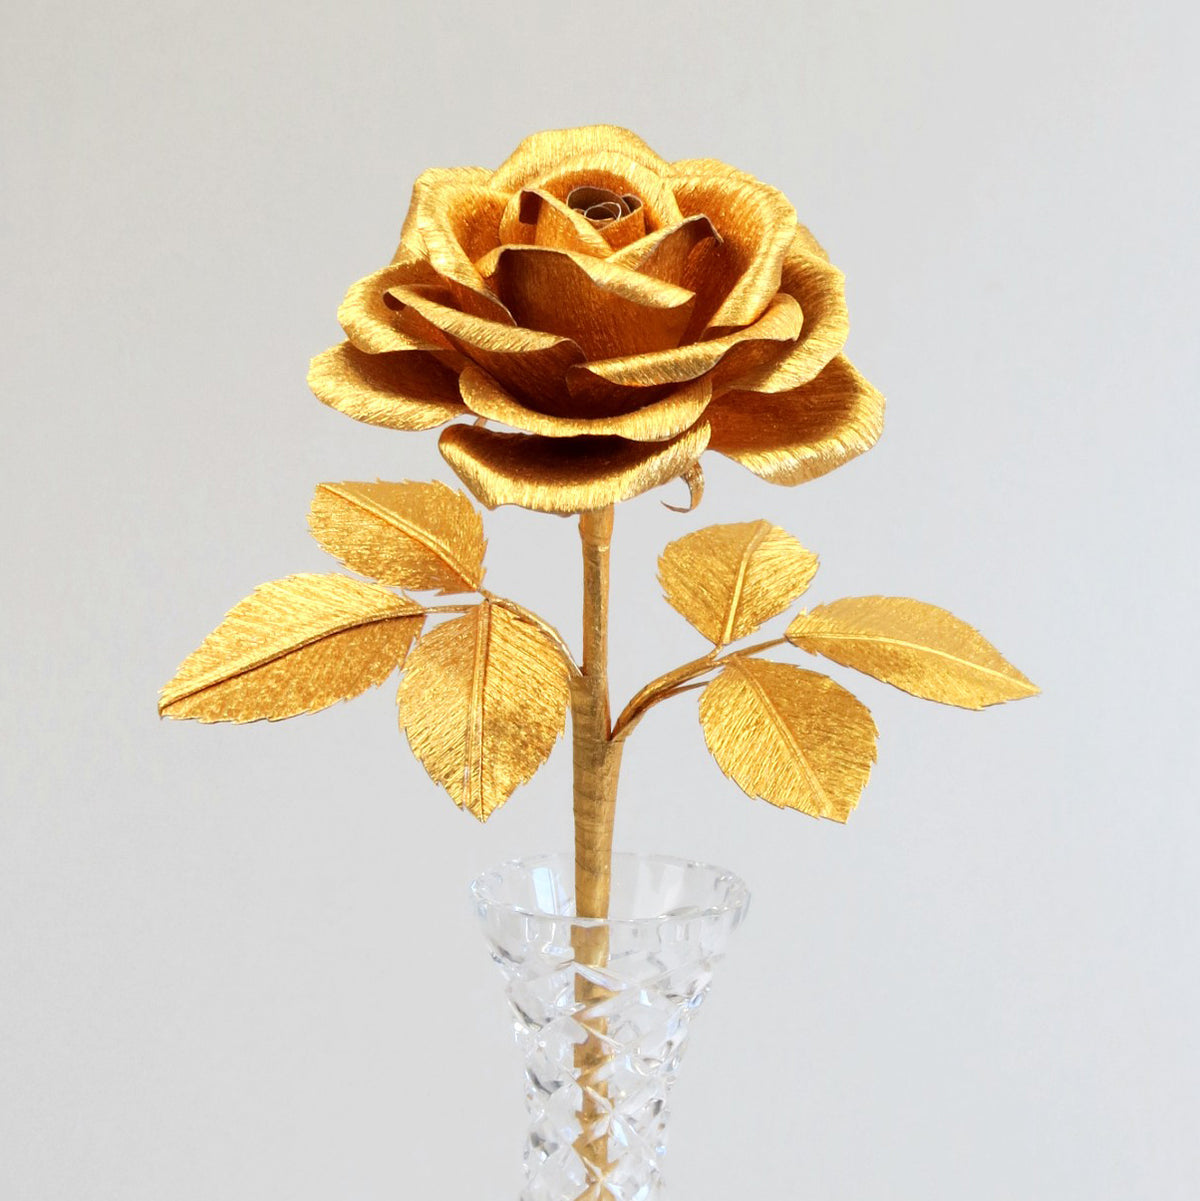 Glimmering gold rose standing upright in a slender crystal vase, with 6 gold leaves attached to the rose stem, standing against a grey background